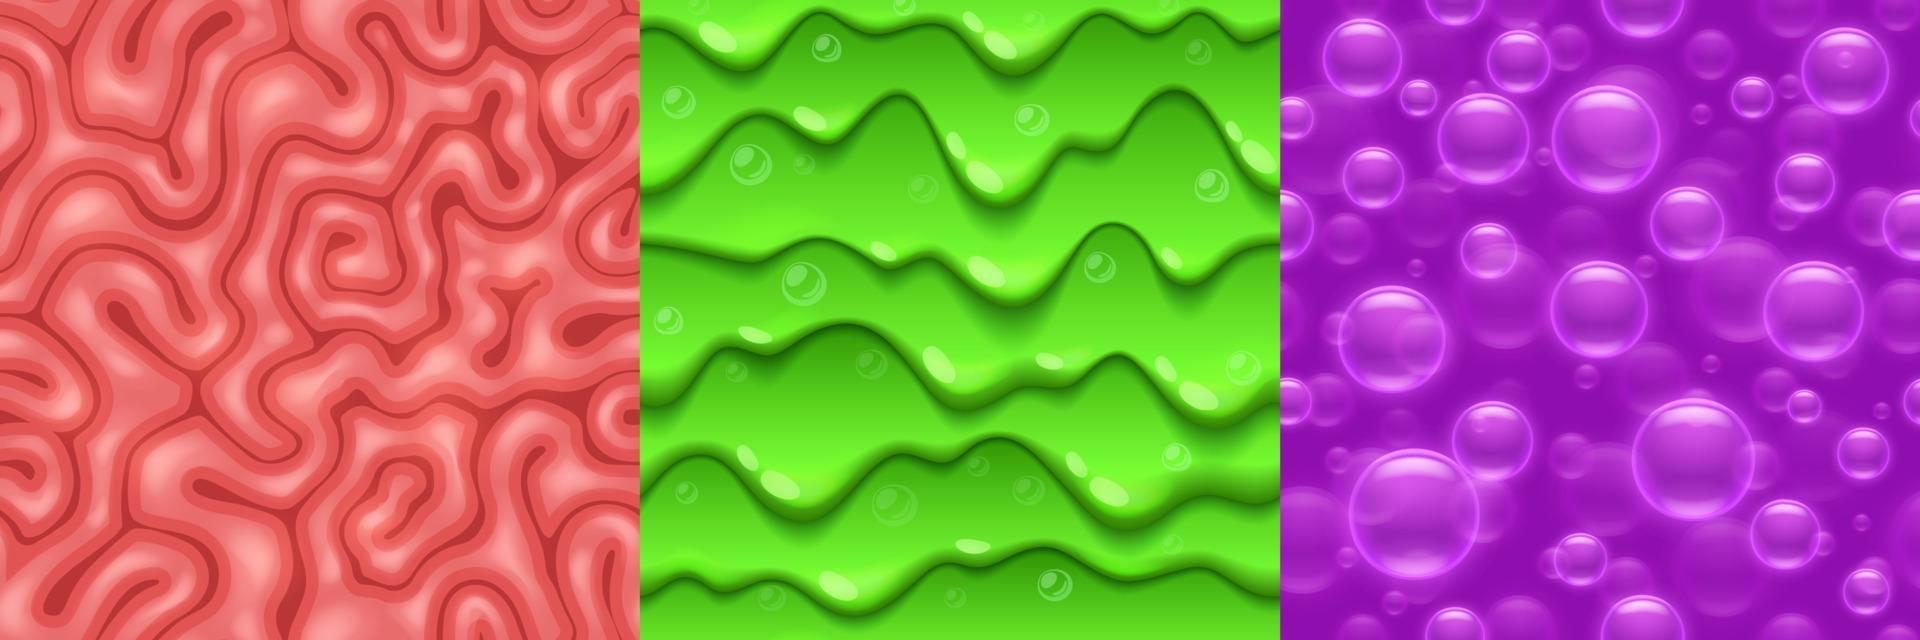 Seamless textures for game brain, slime or bubbles vector